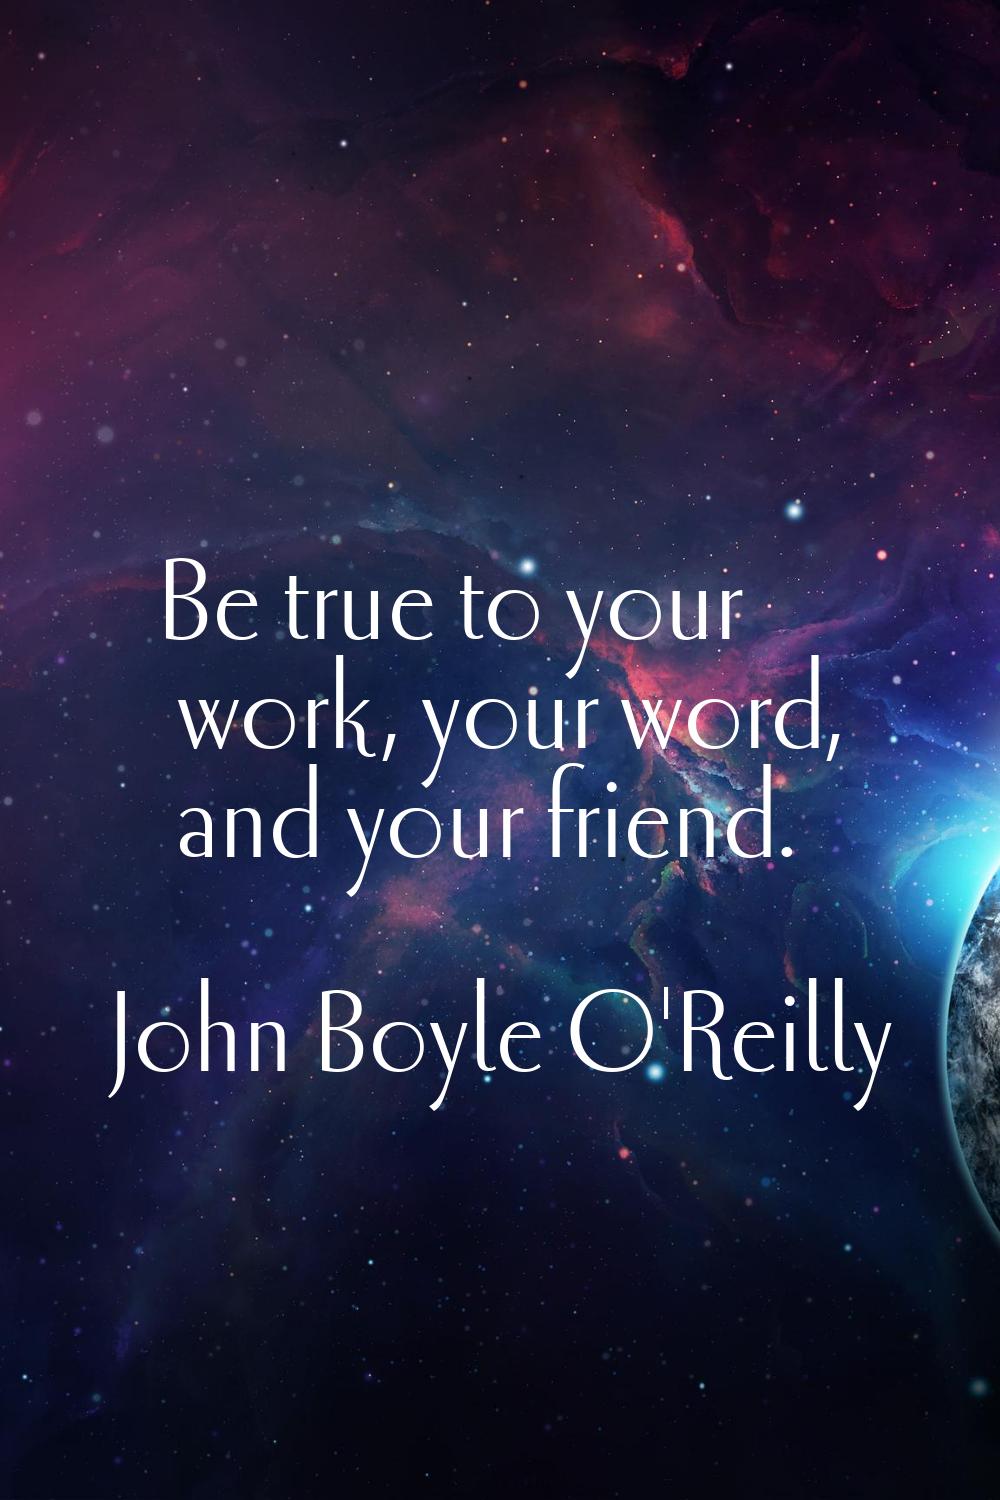 Be true to your work, your word, and your friend.